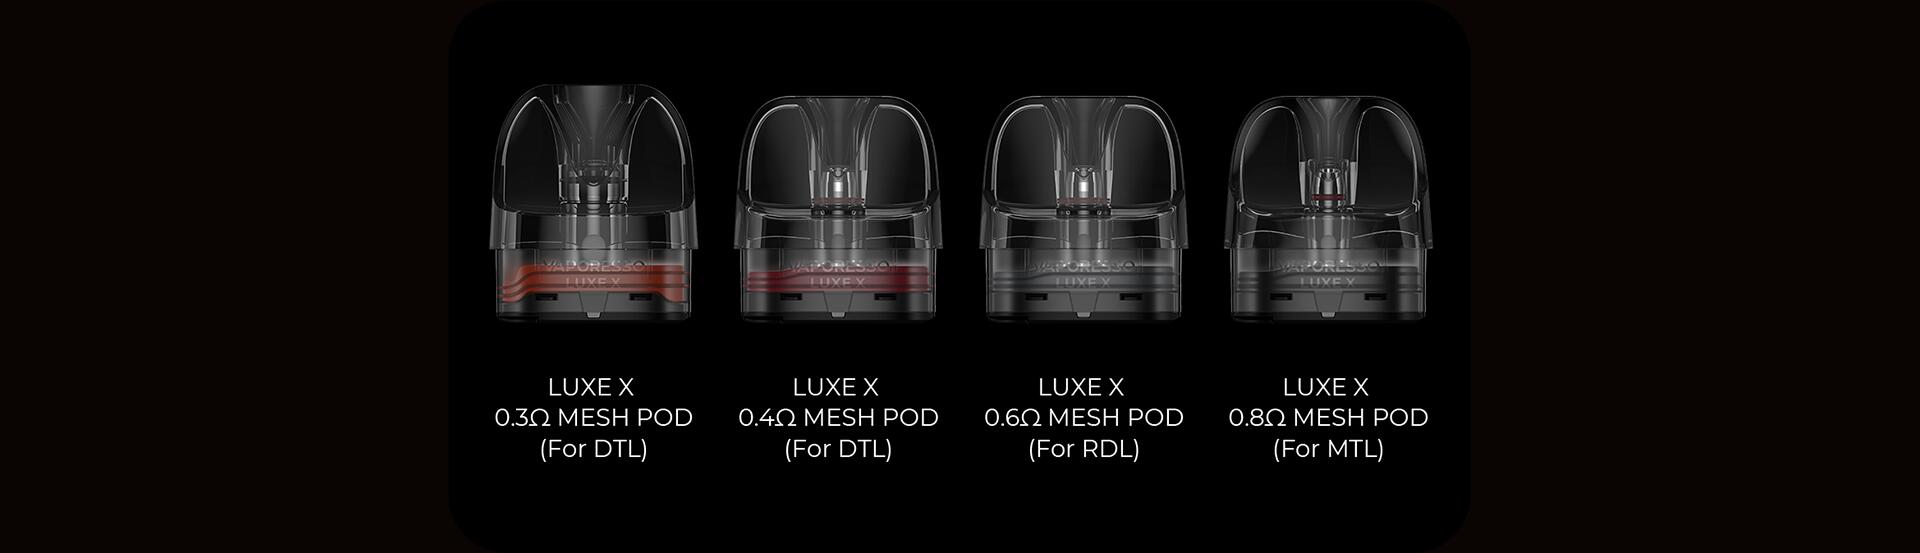 Discovering the Perfect Match Vaporesso Luxe X Pod Selection